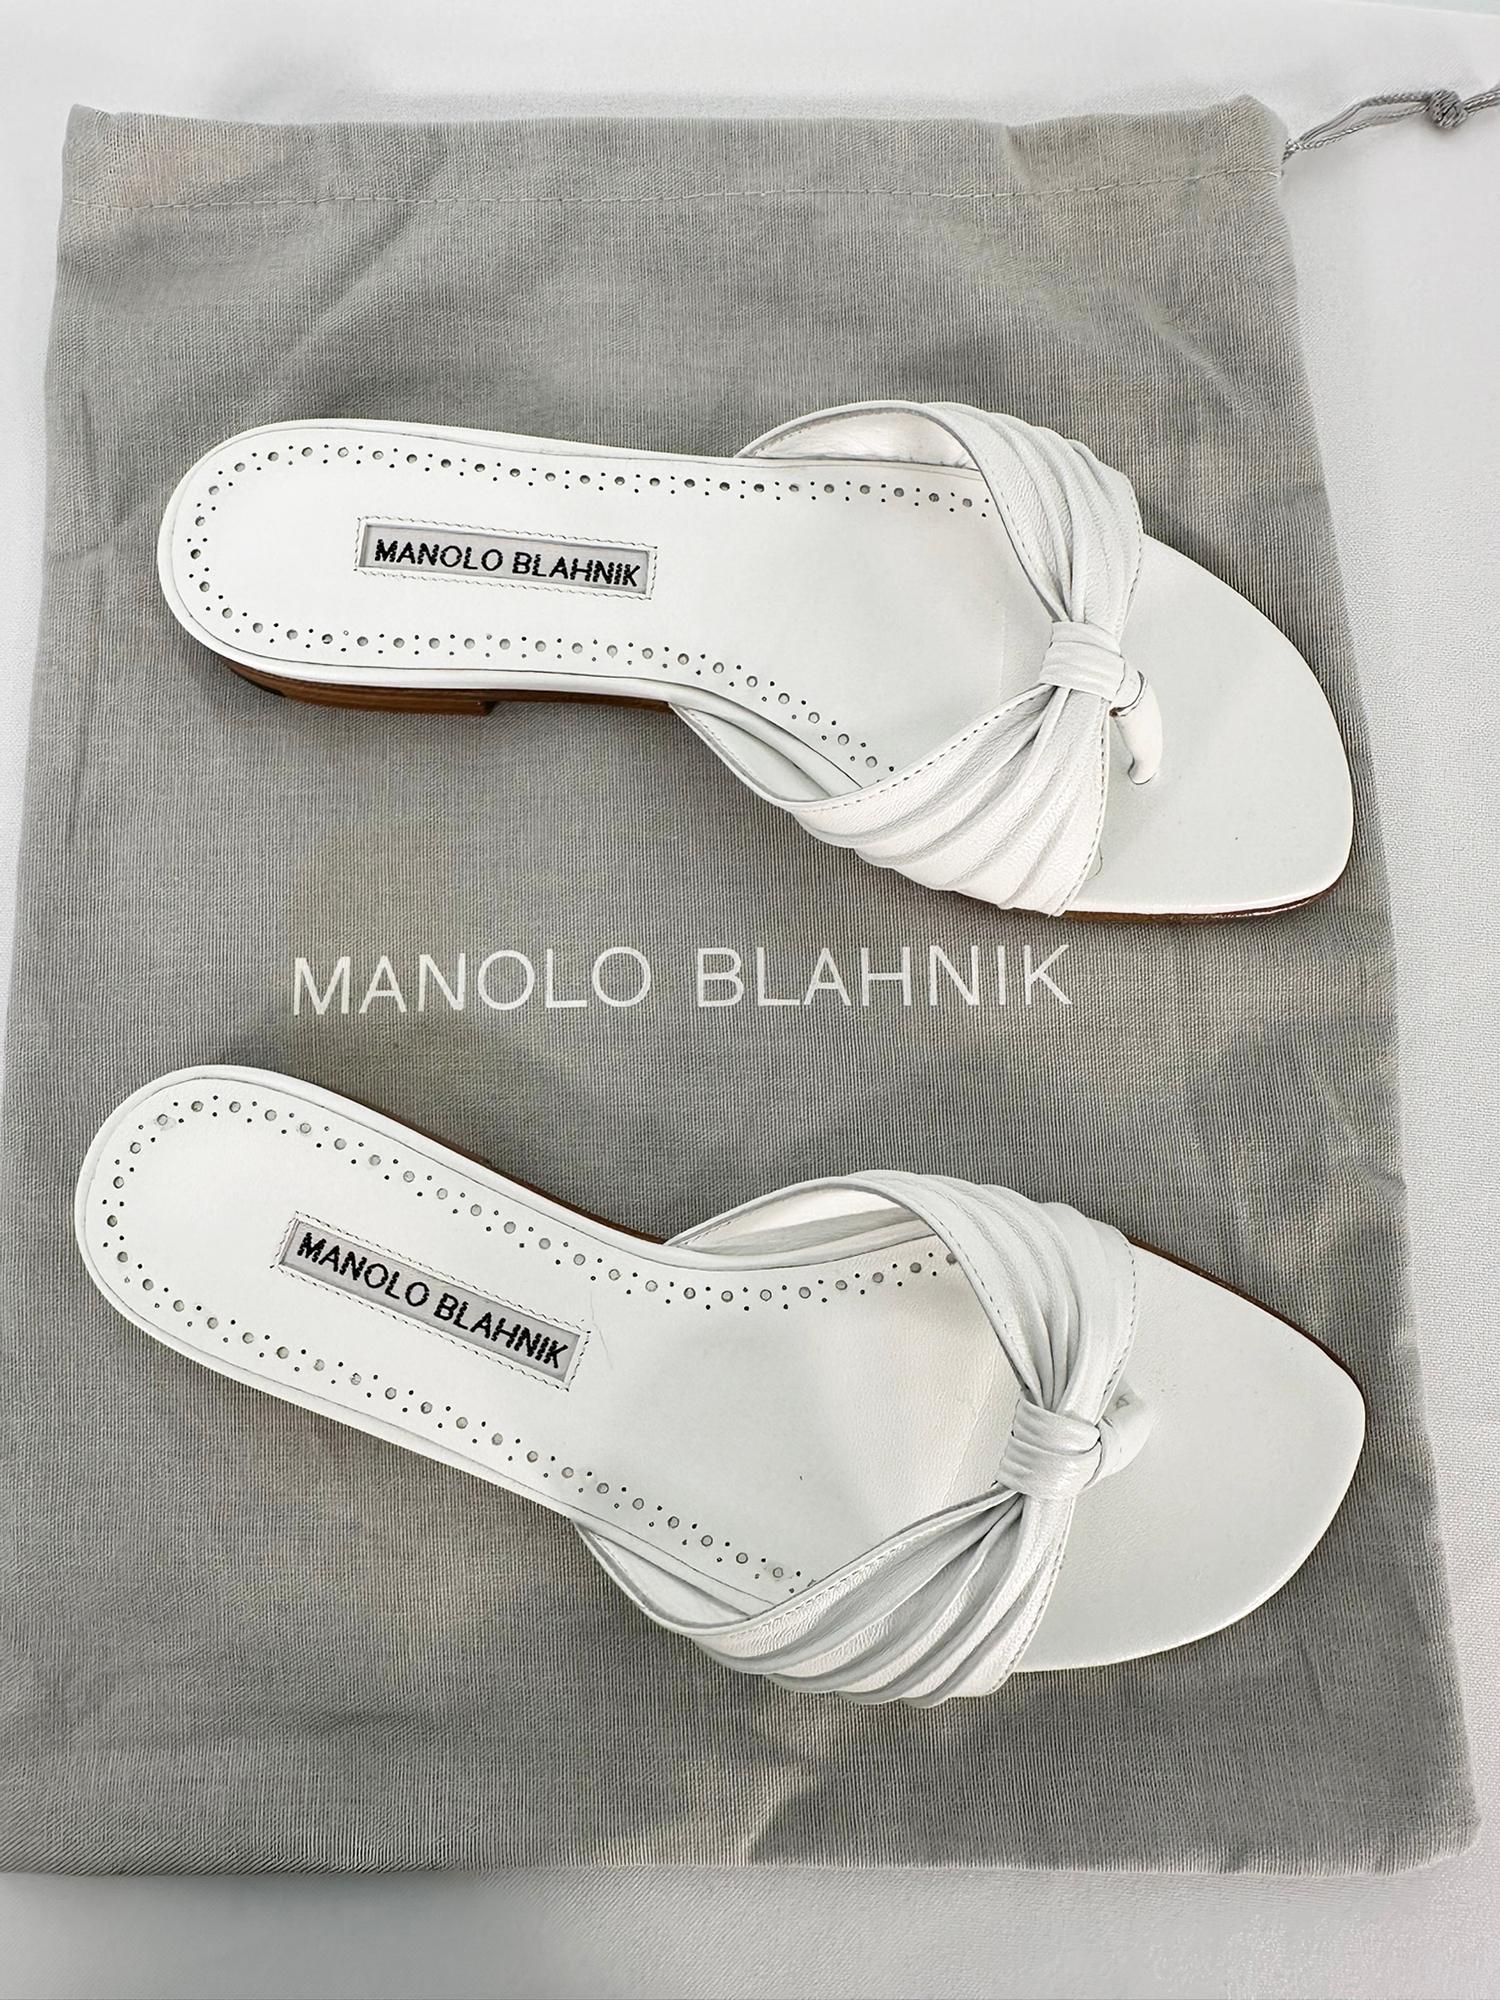 Manolo Blahnik White Leather Thong Sandals 37 Unworn with Box 3